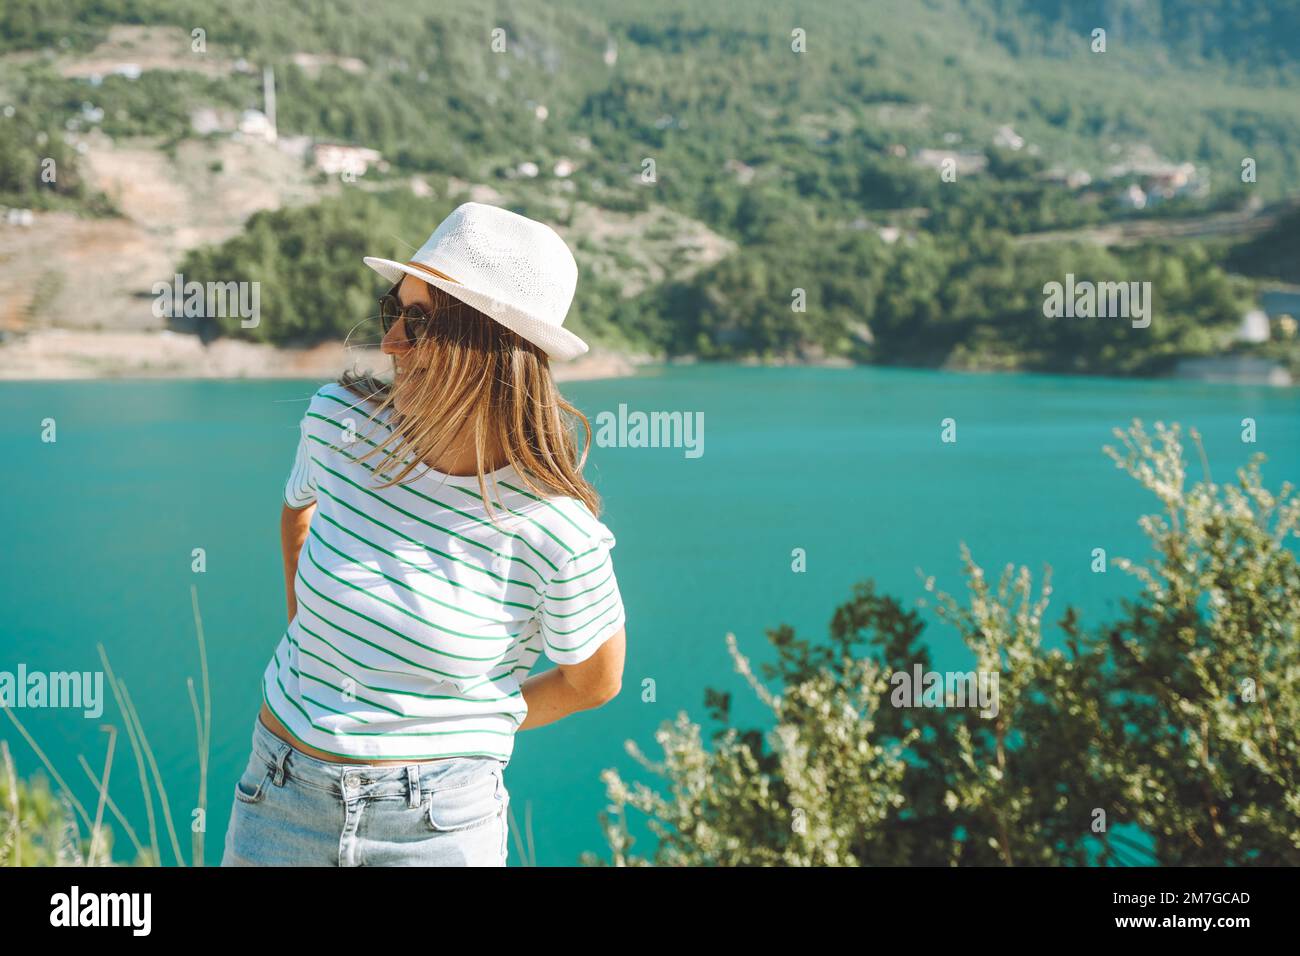 Smiling woman in hat and sunglasses with wild hair standing near mountains lake on background. Positive young woman traveling on blue lake outdoors Stock Photo